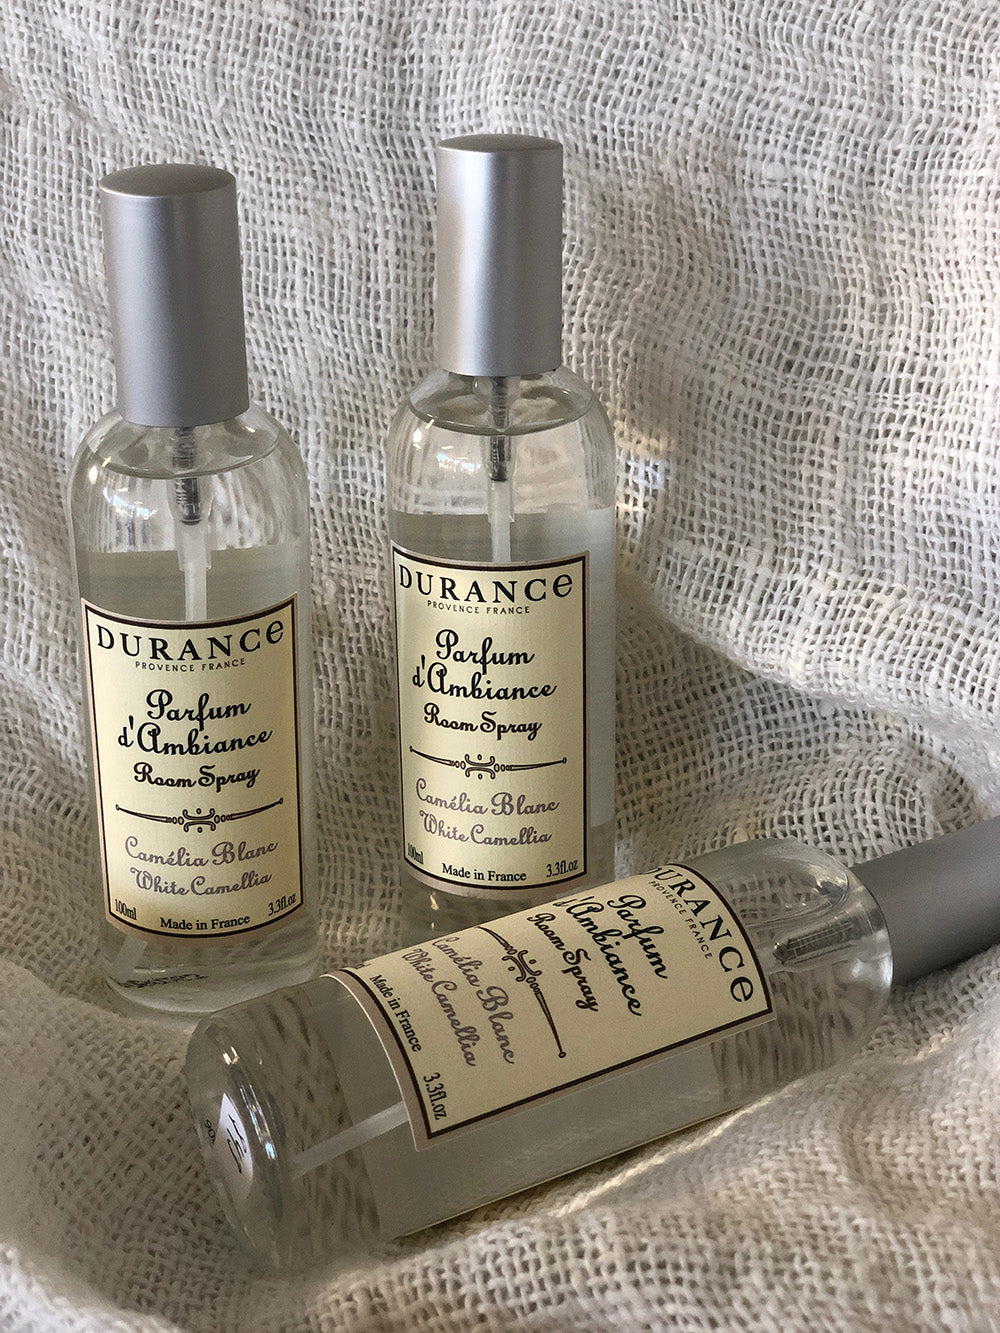 White Camellia Room Spray by Durance Provence France